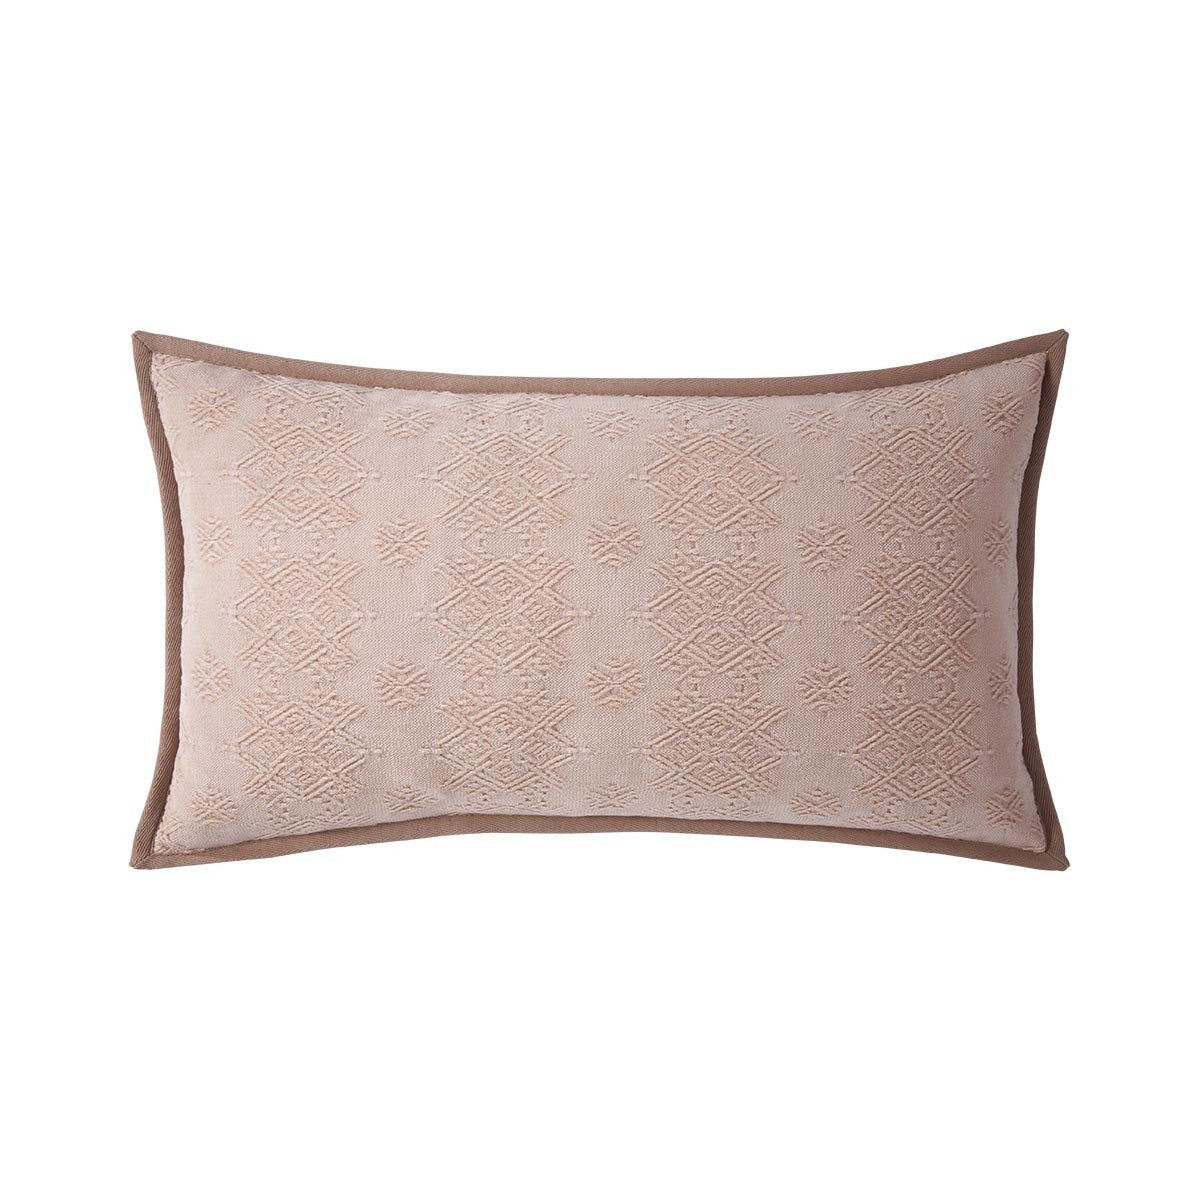 Syracuse Petale Lumbar Pillow by Iosis | Fig Linens and Home